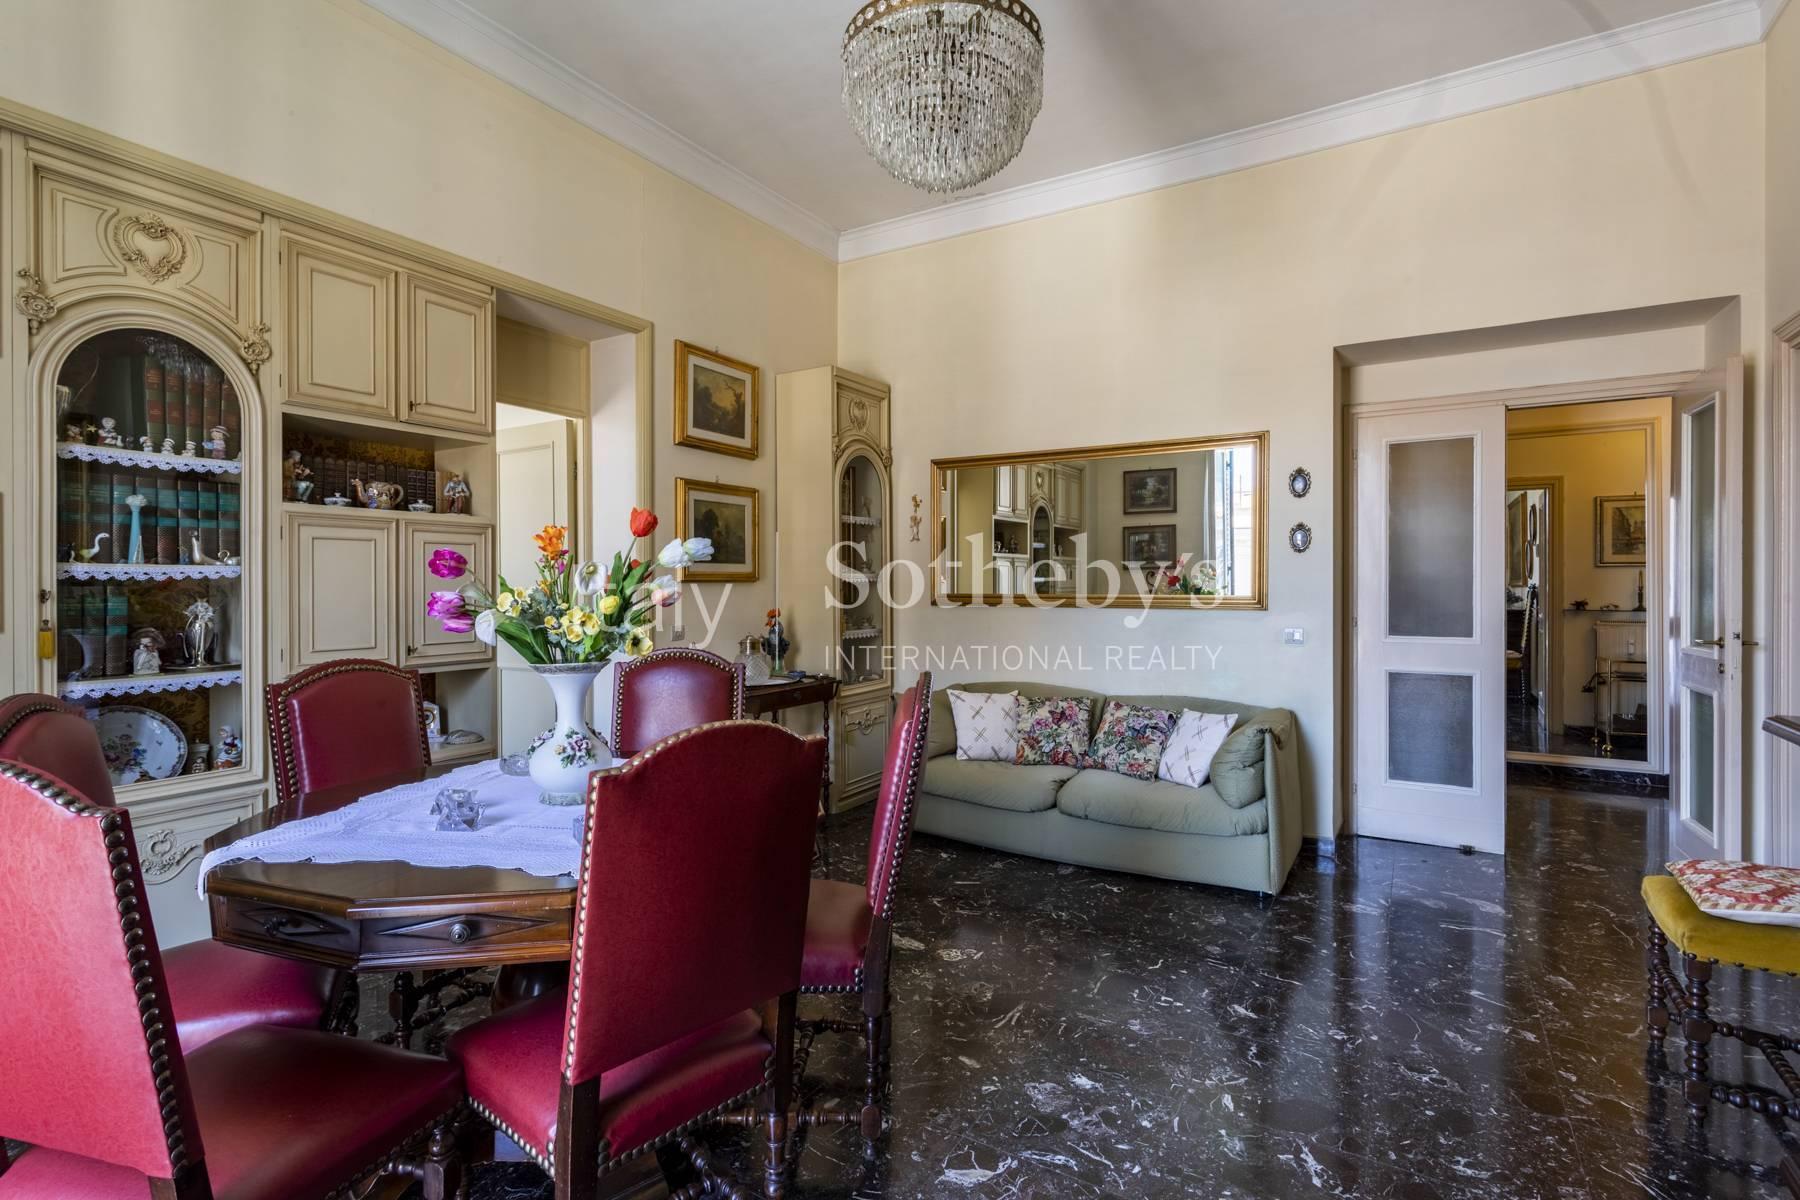 Bright and spacious penthouse in Prati, a stone's throw from the Vatican - 5